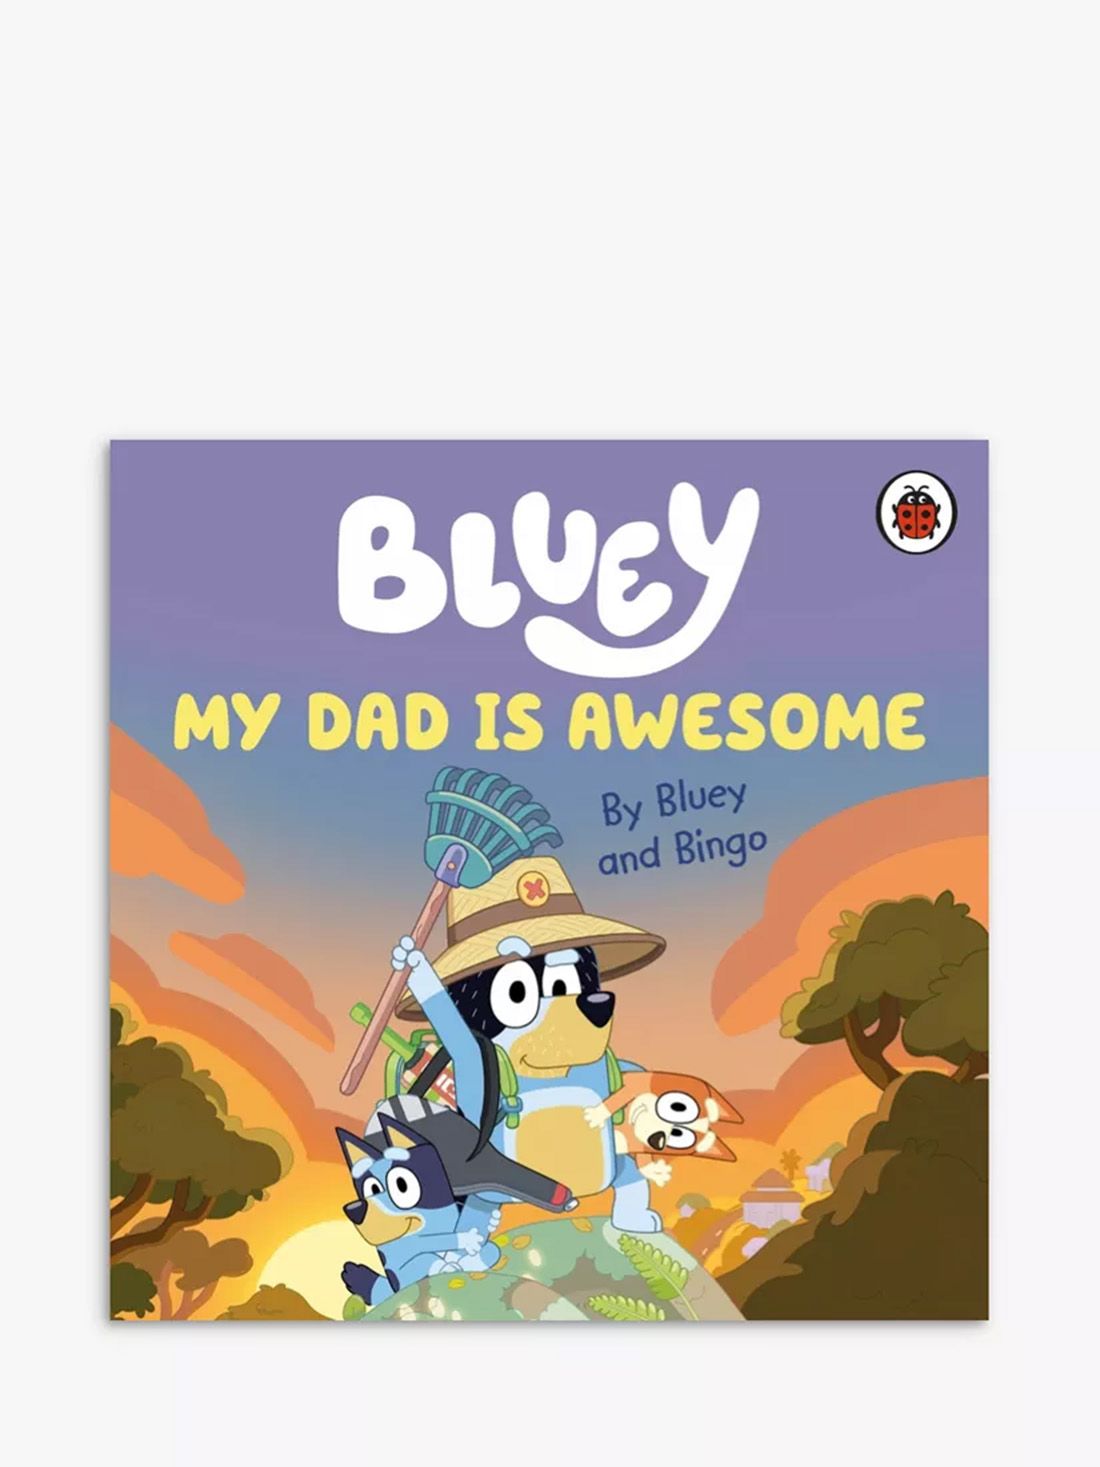 My Dad is Awesome, Bluey book